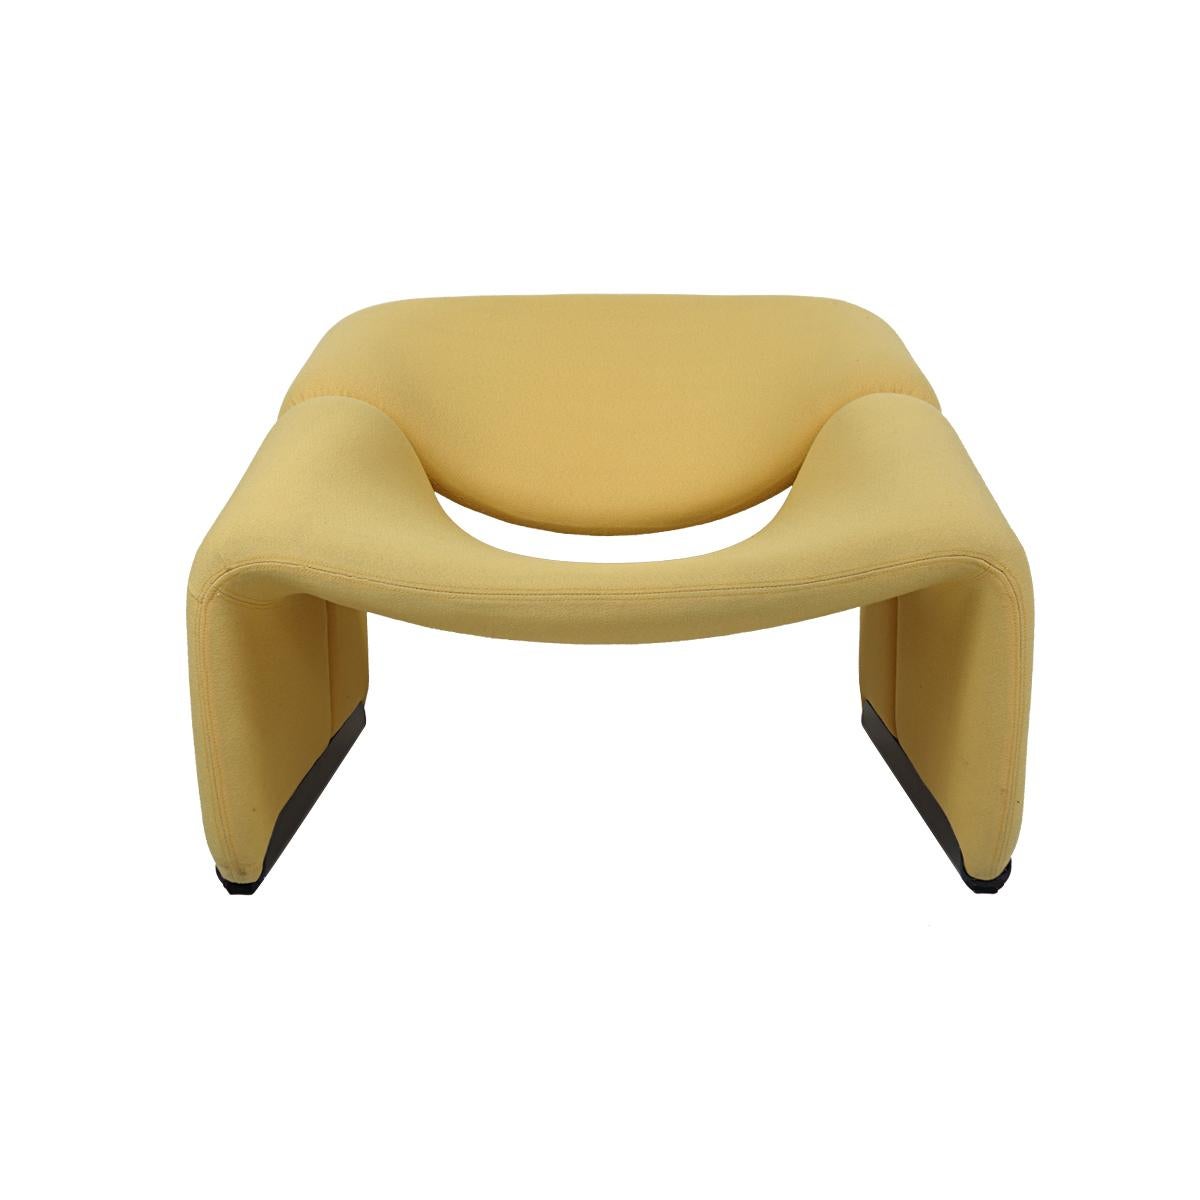 The Groovy Chair, or F598, designed by Pierre Paulin for Artifort, has become a true design classic. 
Very pleasant to the eye, especially in this stunning corn color, it is also remarkably comfortable, especially given its modest dimensions.